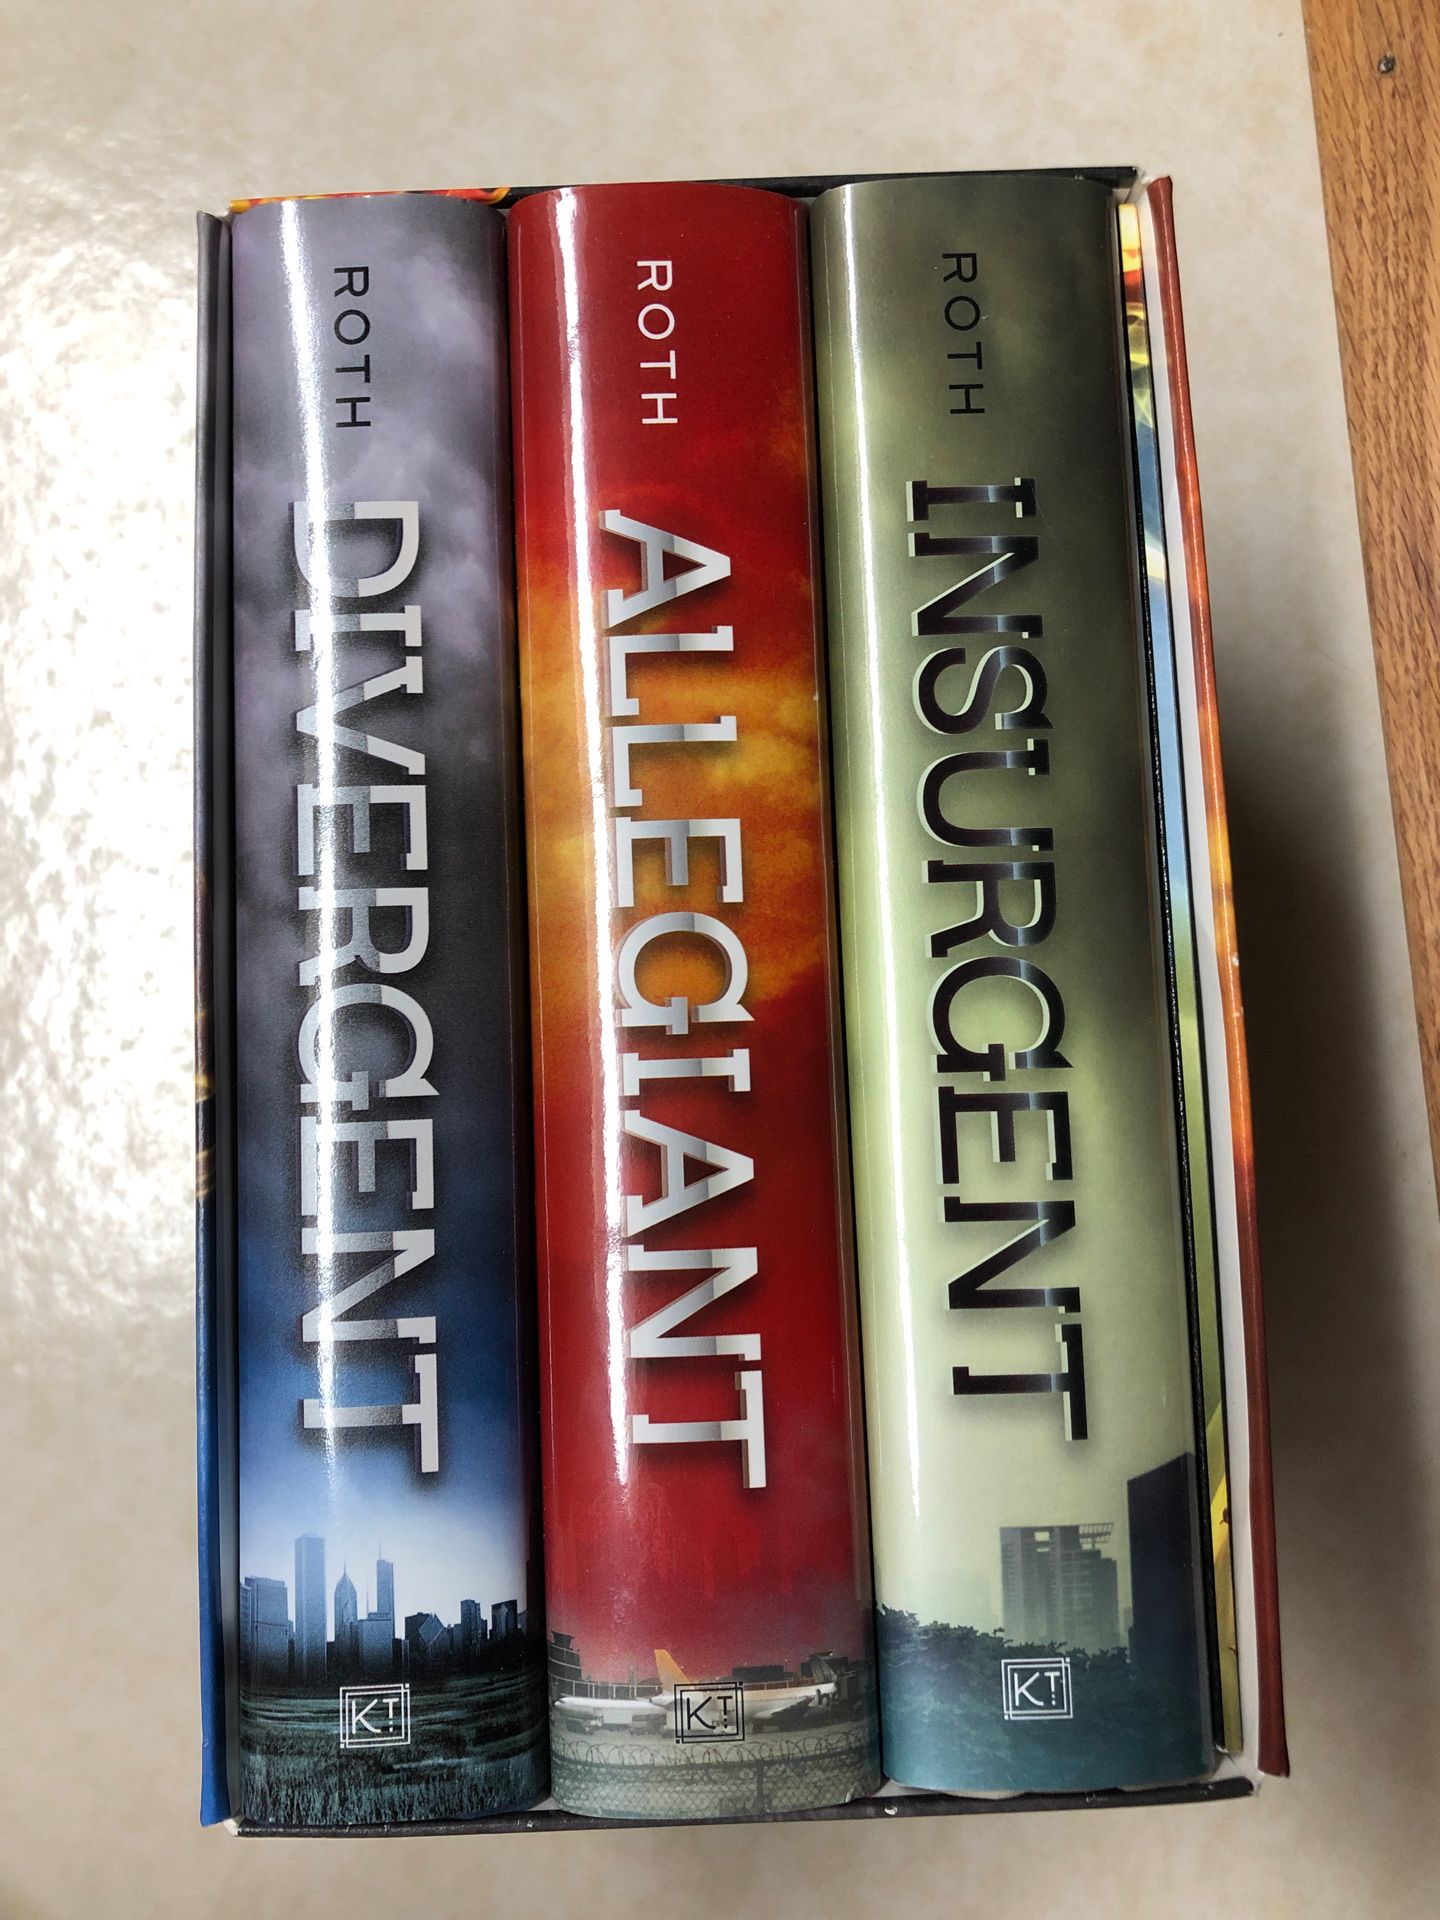 The Divergent Series by Veronica Roth